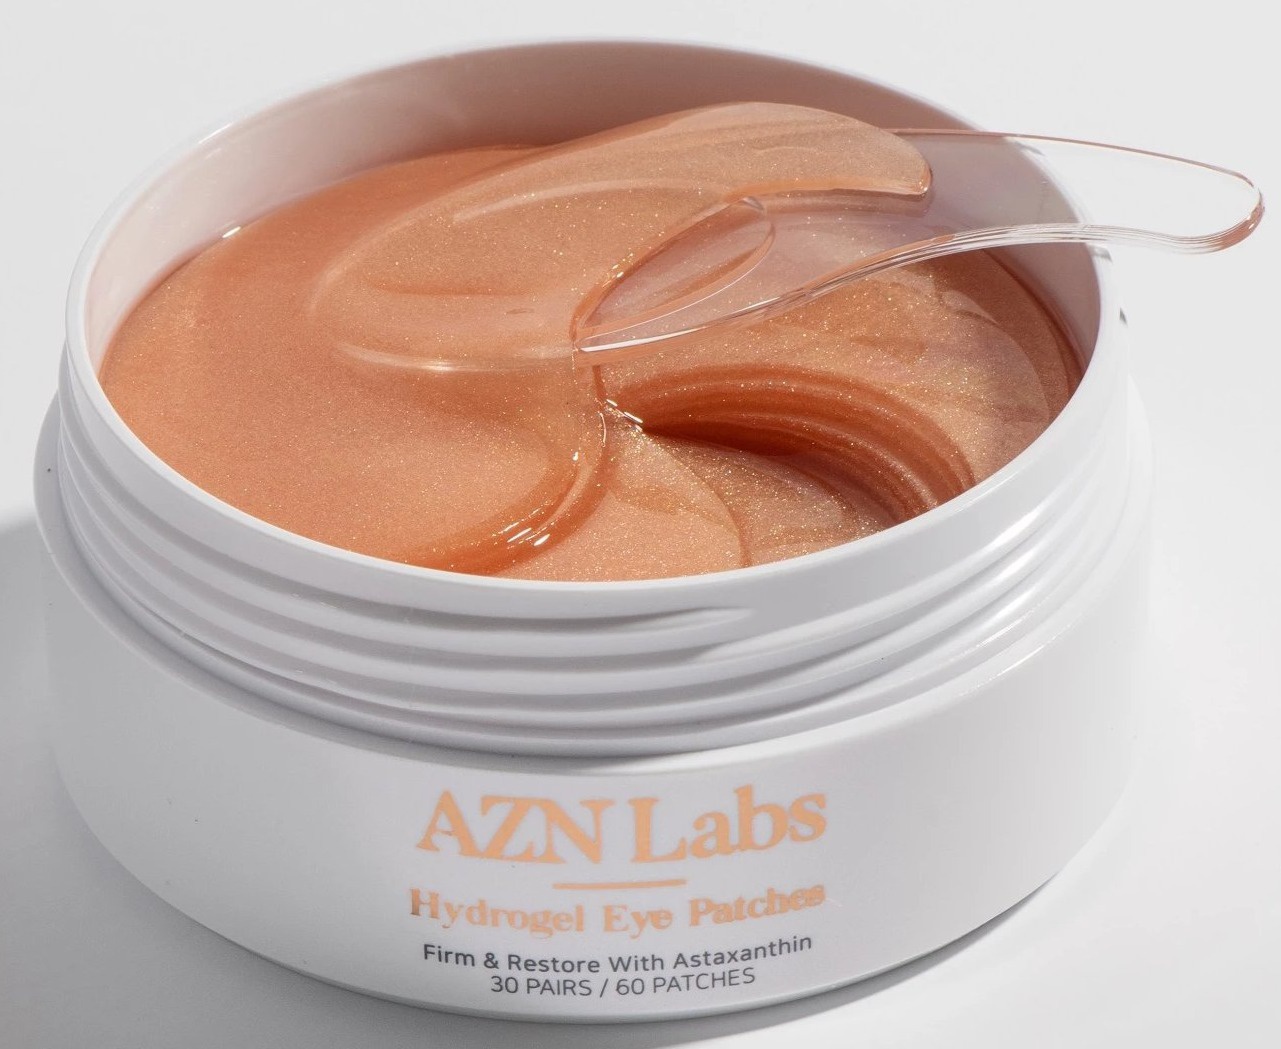 AZN Labs Hydrogel Eye Patches